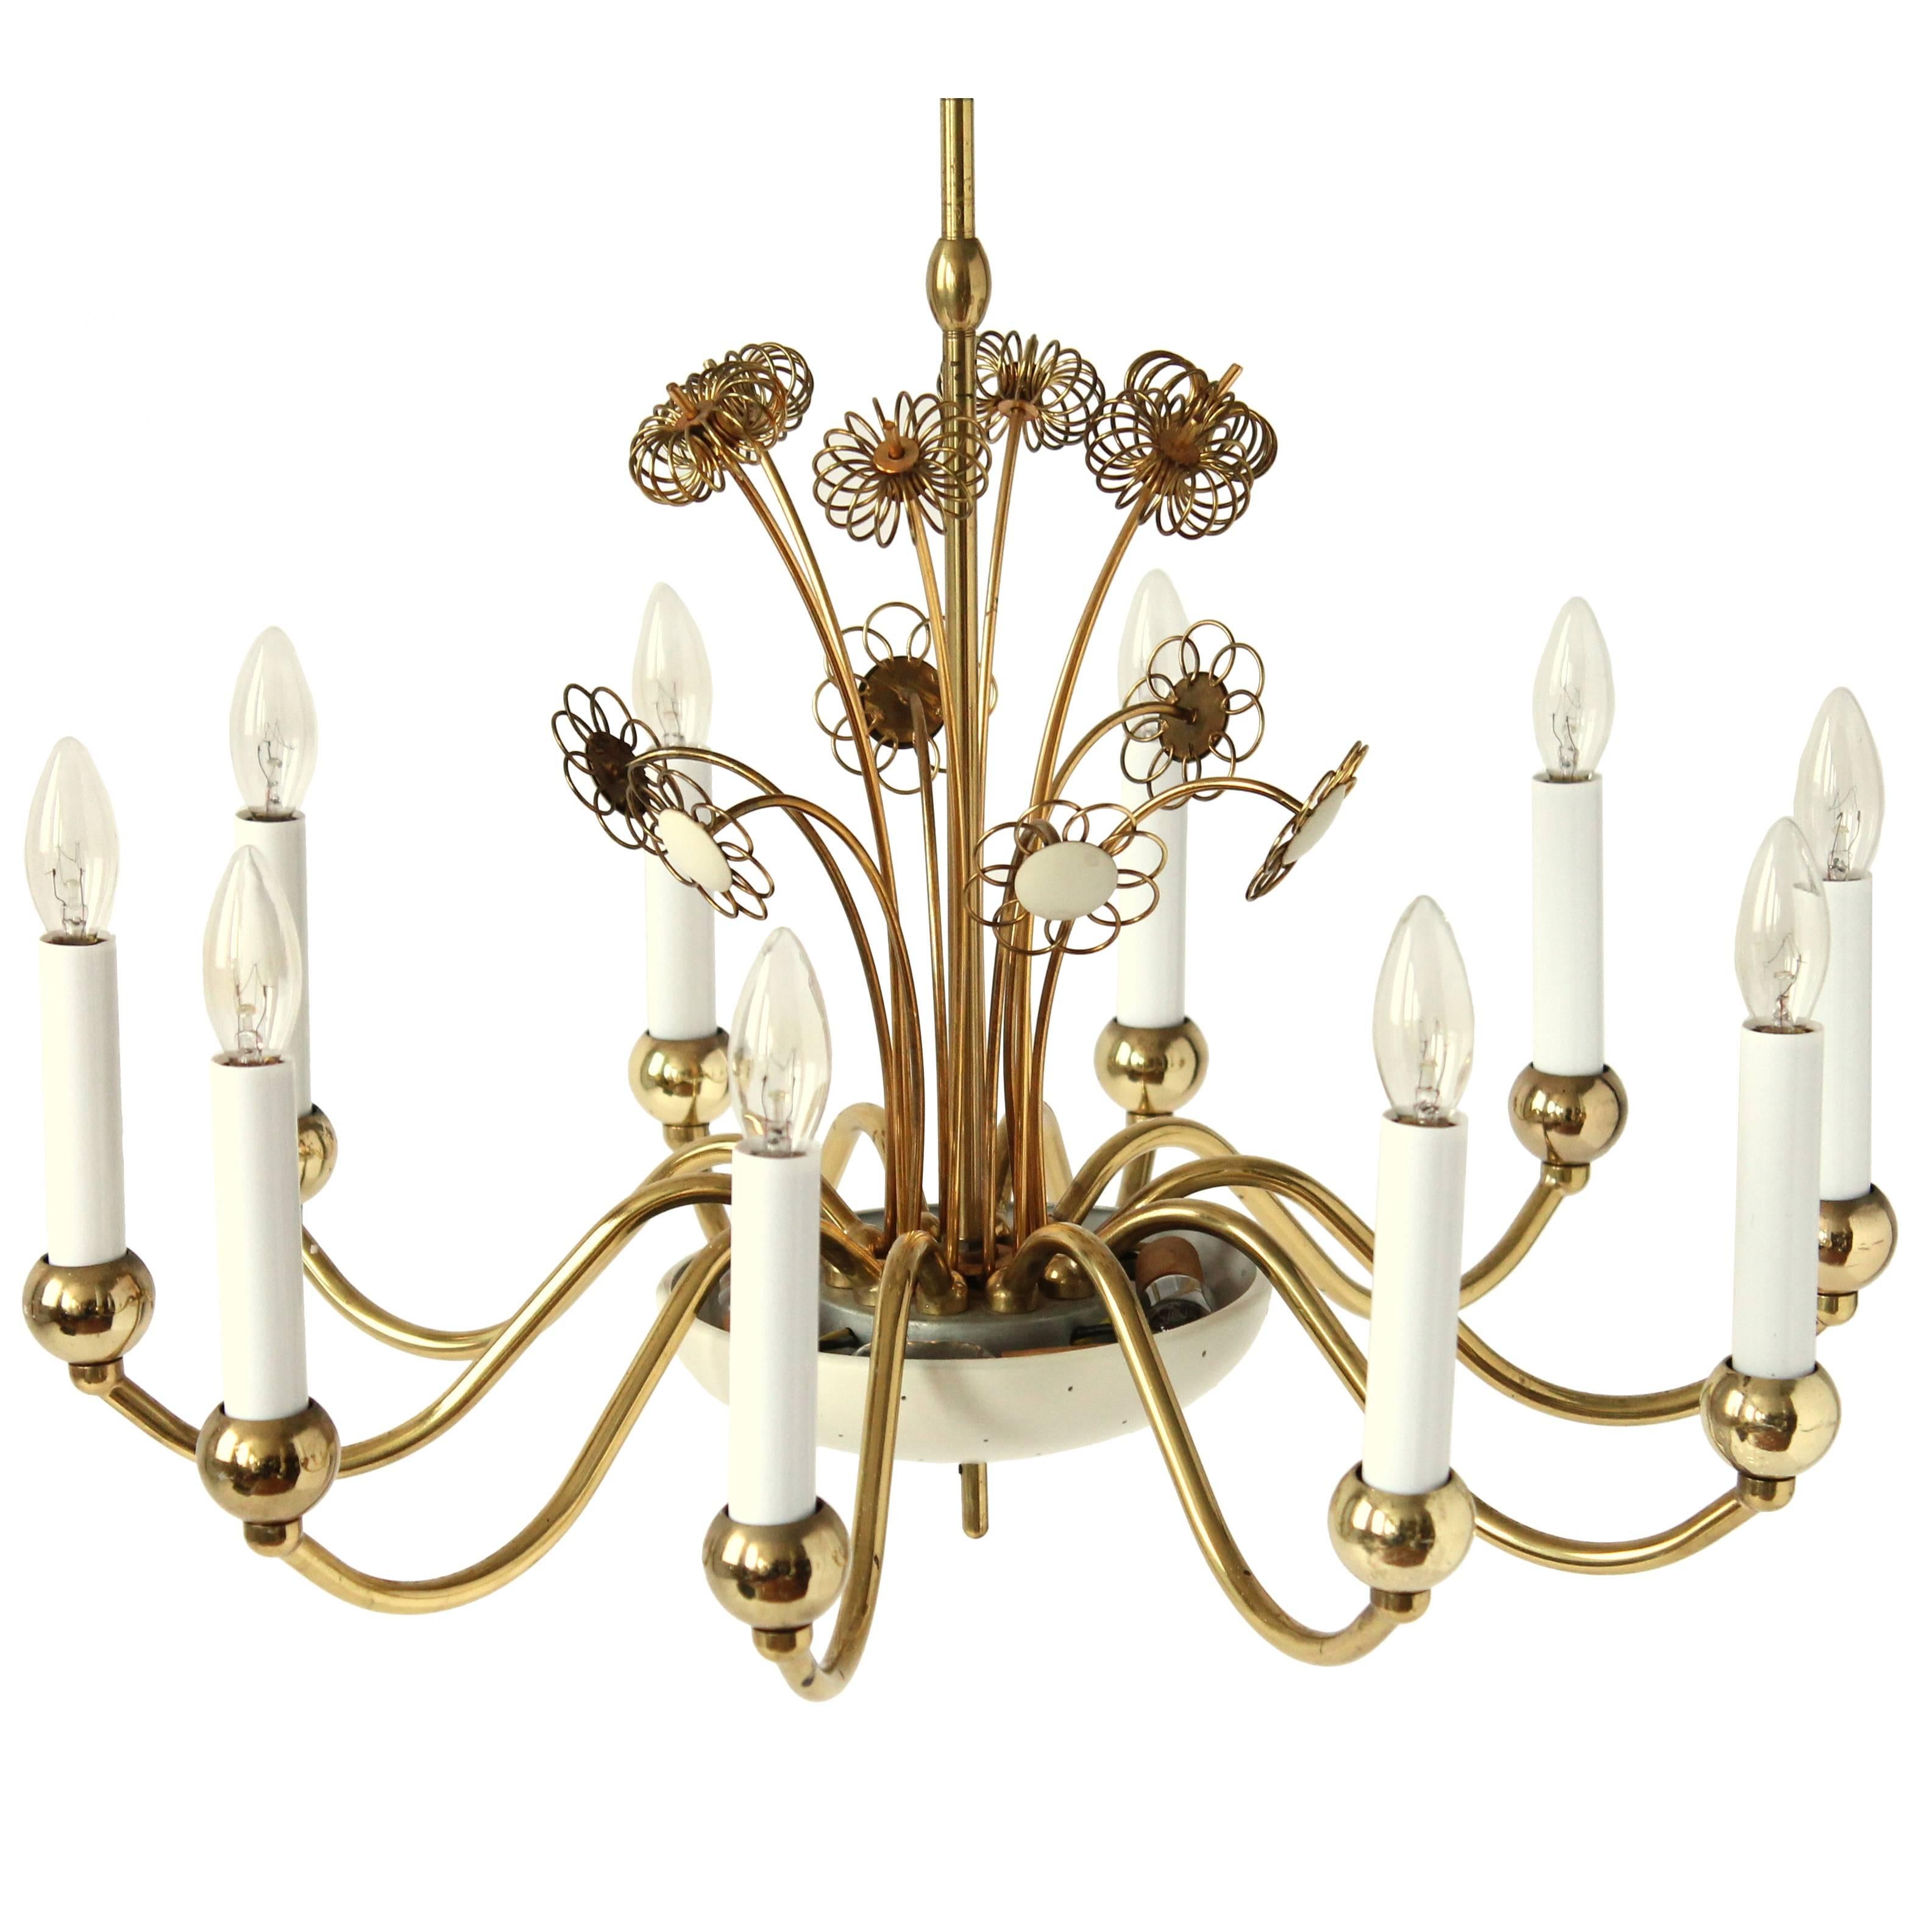 Paavo Tynell collaborated for a short period of time with Lightolier in the 50s. There is obvious influence of his style in this chandelier .

There is 14 light bulbs on this lamp .  4 are hidden  under  the lightly  pierced  shade under . 

The